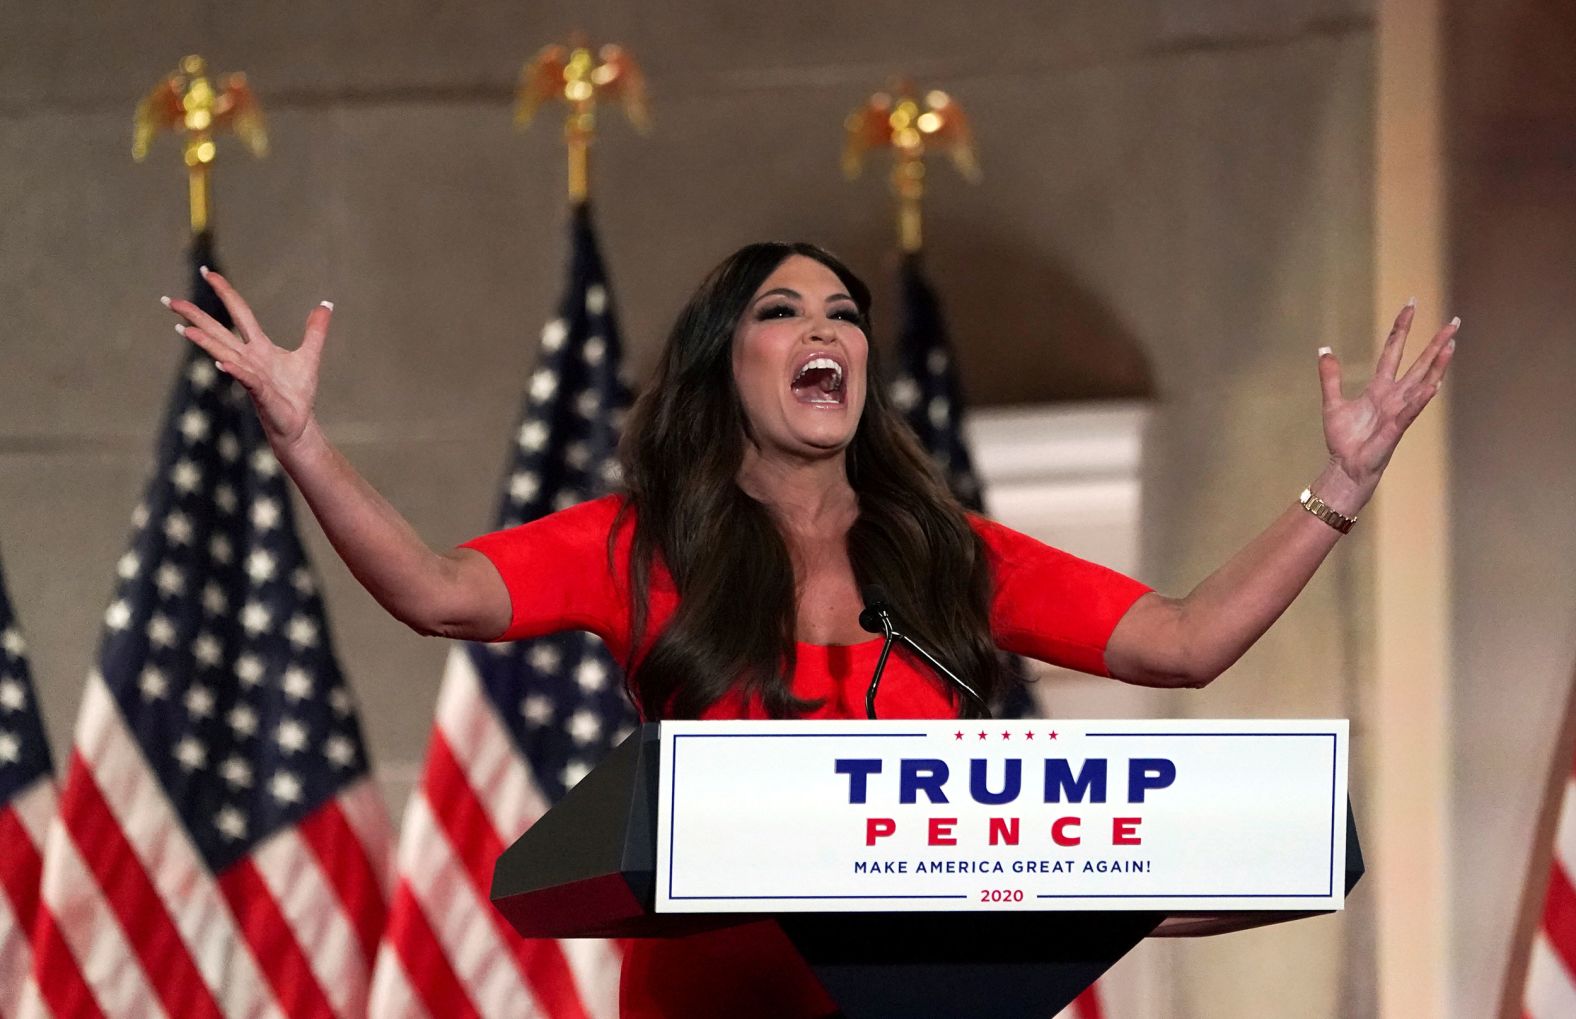 Kimberly Guilfoyle, a top fundraiser for the Trump campaign and the girlfriend of Donald Trump Jr., <a href="https://www.cnn.com/politics/live-news/rnc-2020-day-1/h_af09bfc7ec02eb6314c11644d3674e9f" target="_blank">delivers her speech.</a> She said the President "is the leader who will rebuild the promise of America and ensure that every citizen can realize their American dream."